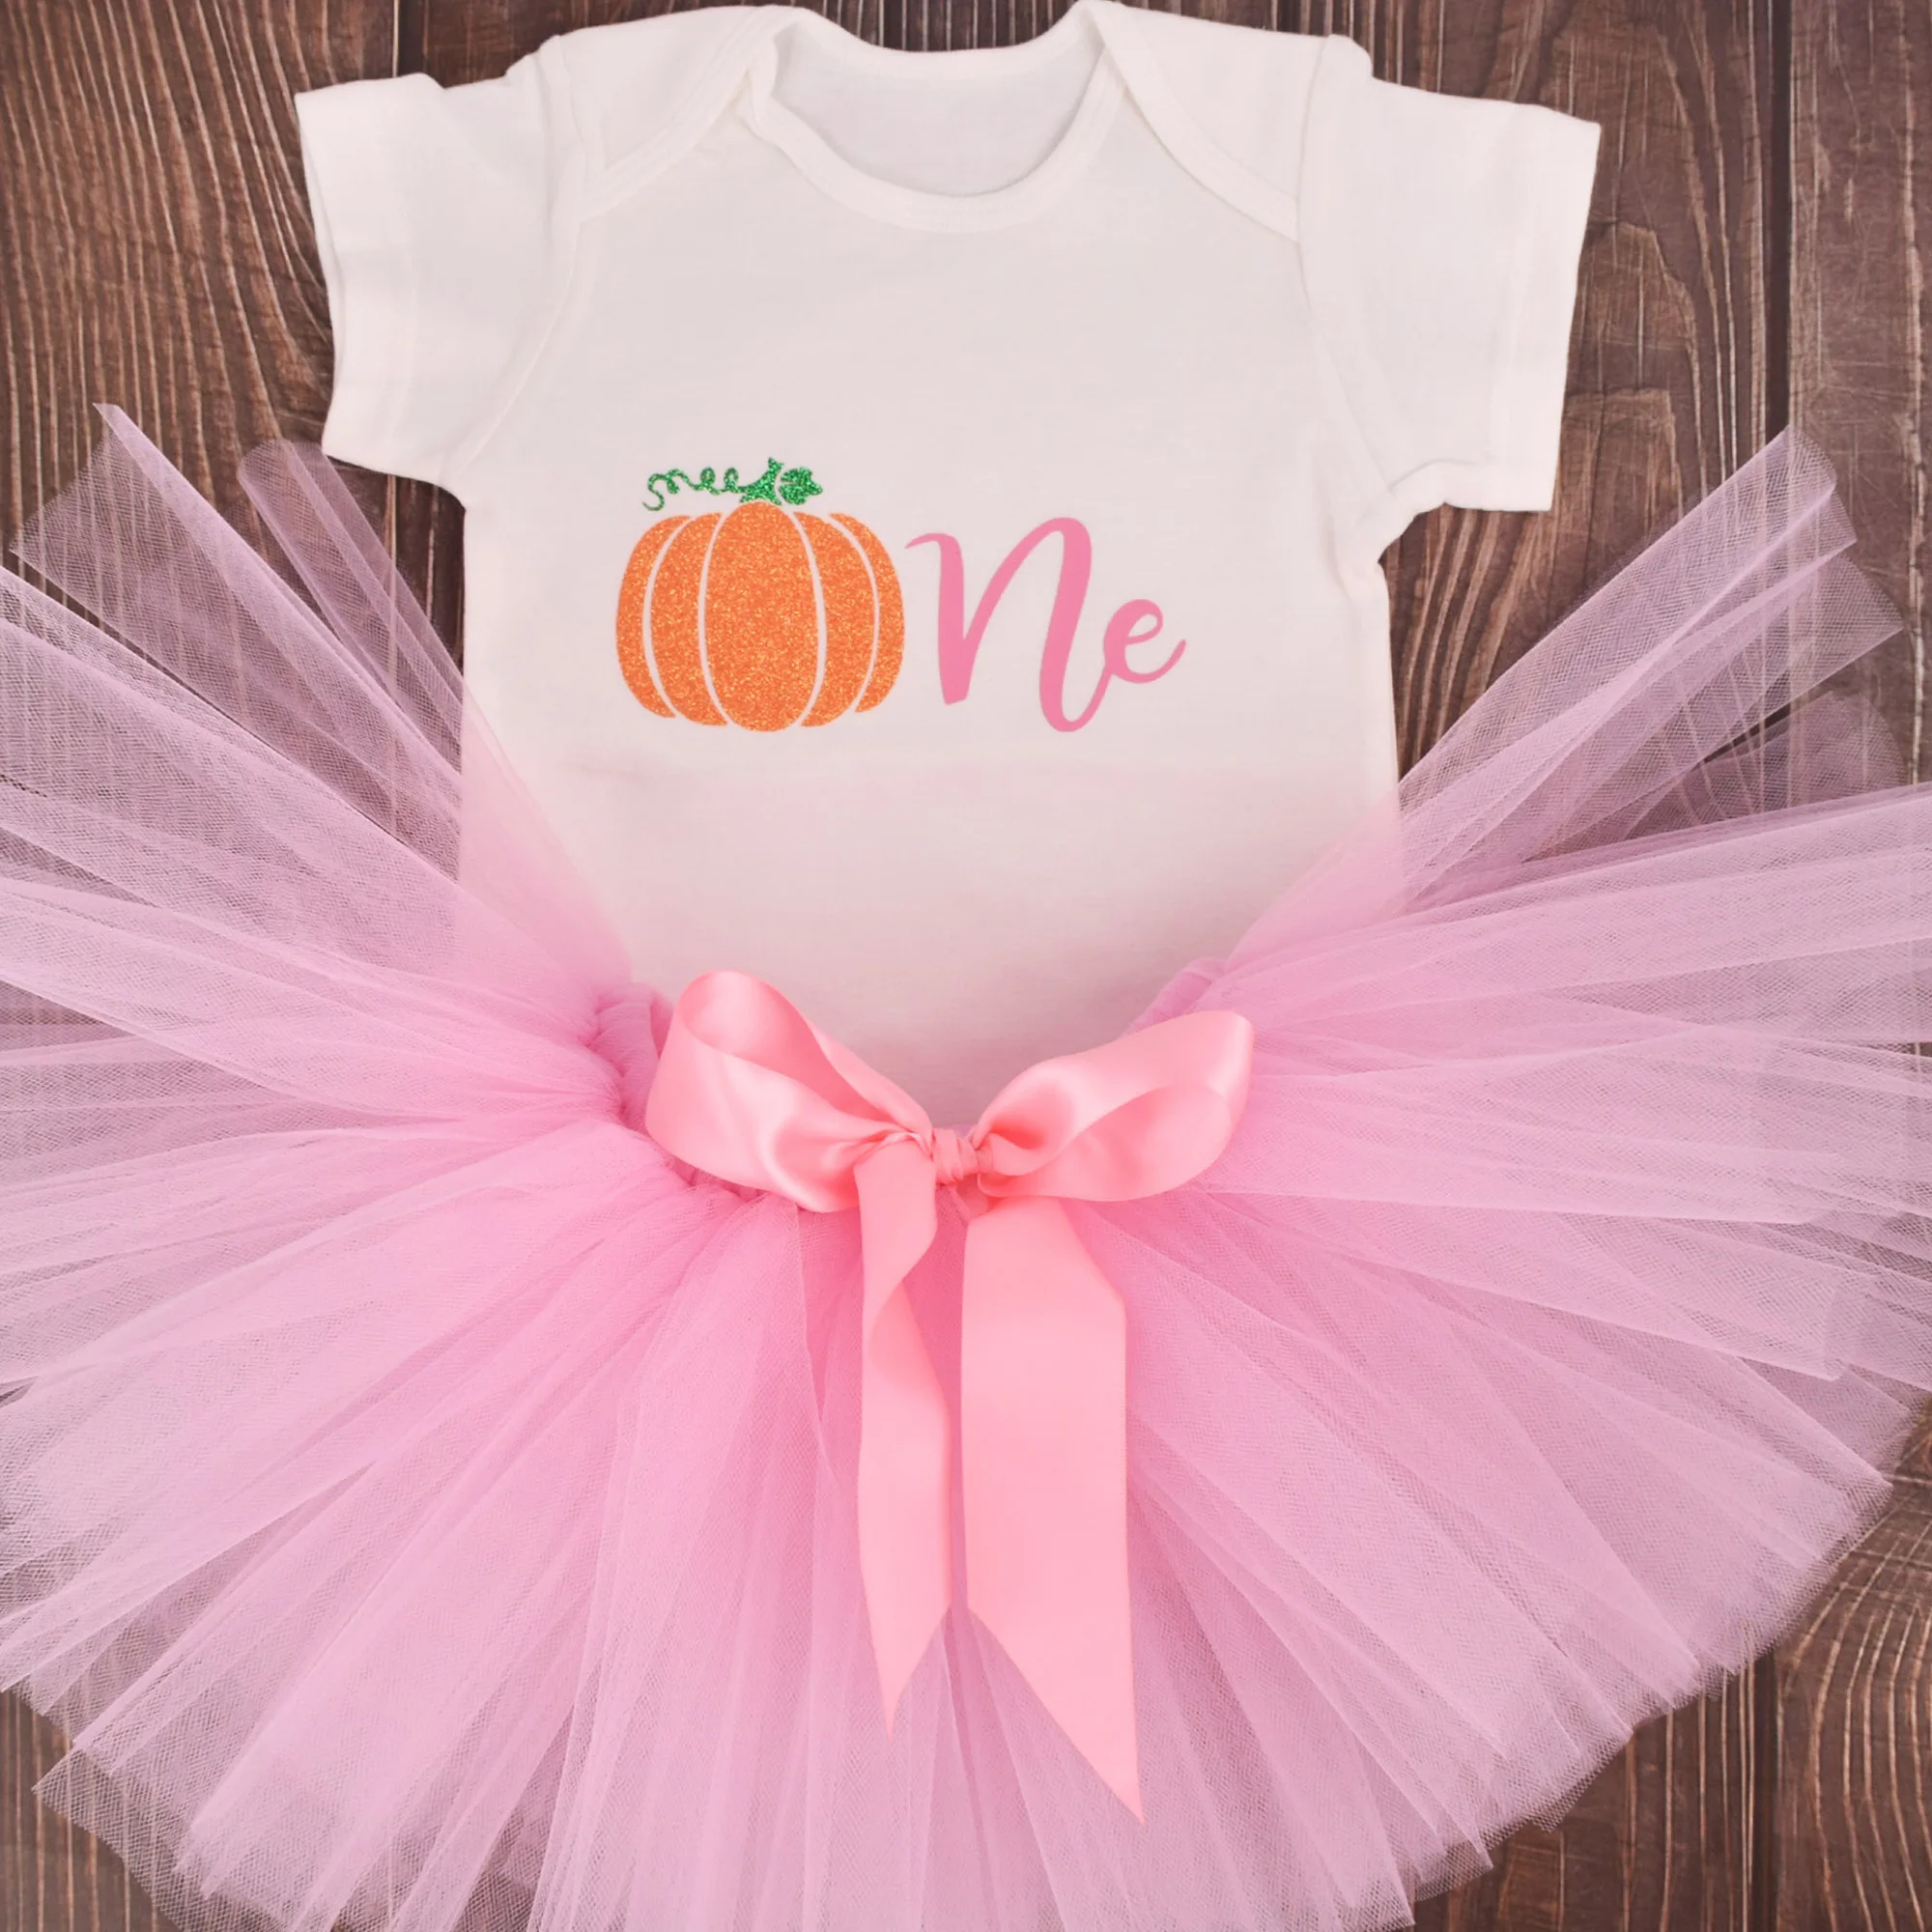 

Baby Girl Halloween Pumpkin Tutu Outfit 1st Birthday Girls Baby Tutus Summer Clothes Set Infant Cake Smash Photo Shoot outfits